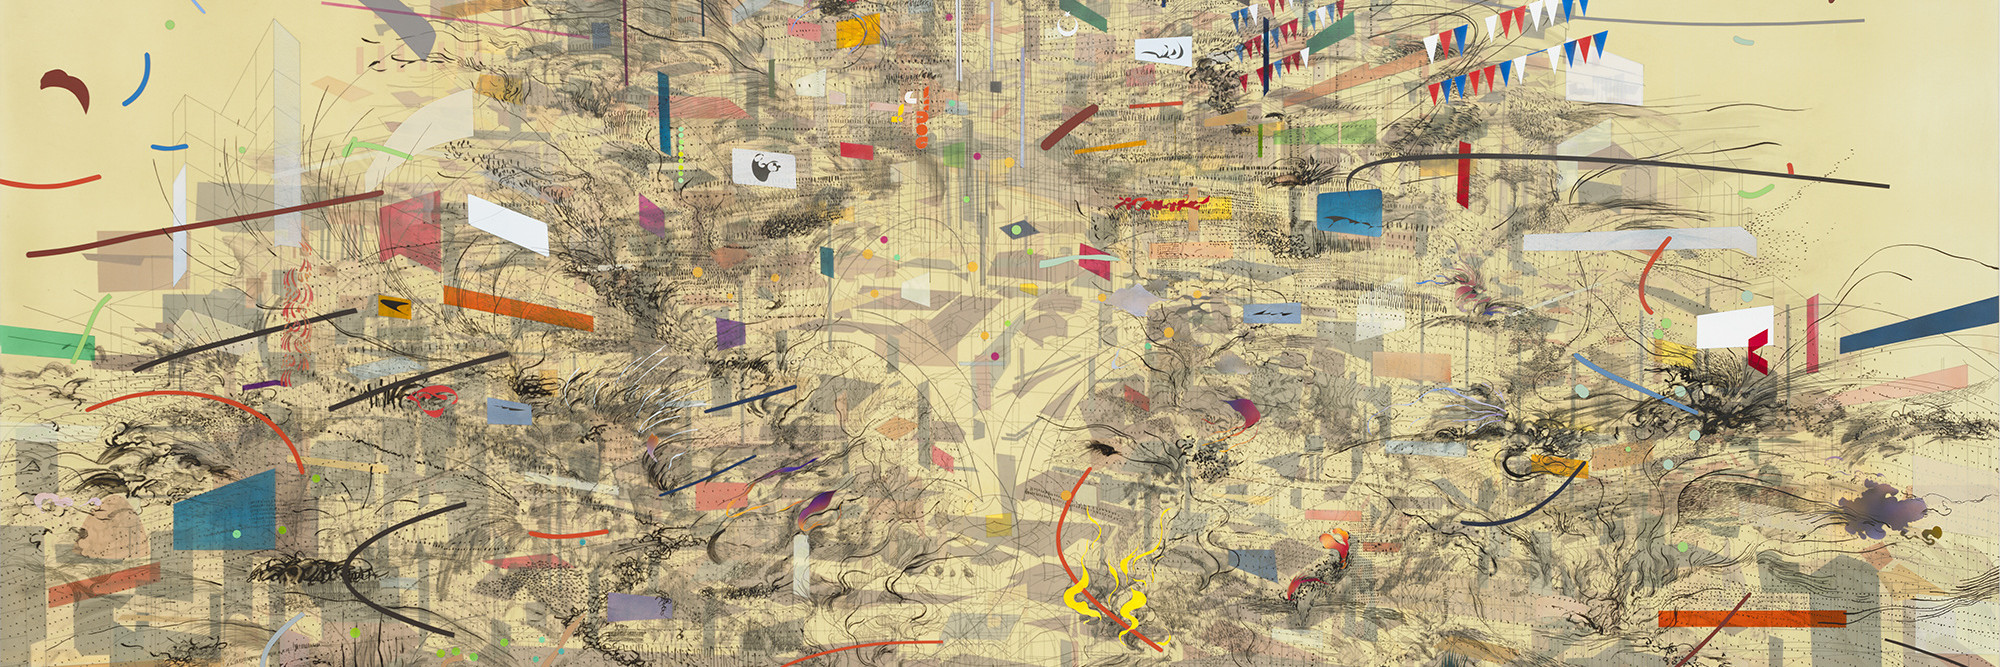 Julie Mehretu. Empirical Construction, Istanbul. 2003. Ink and synthetic polymer paint on canvas, 10′ × 15′ (304.8 × 457.2 cm). Fund for the Twenty-First Century. © 2010 Julie Mehretu